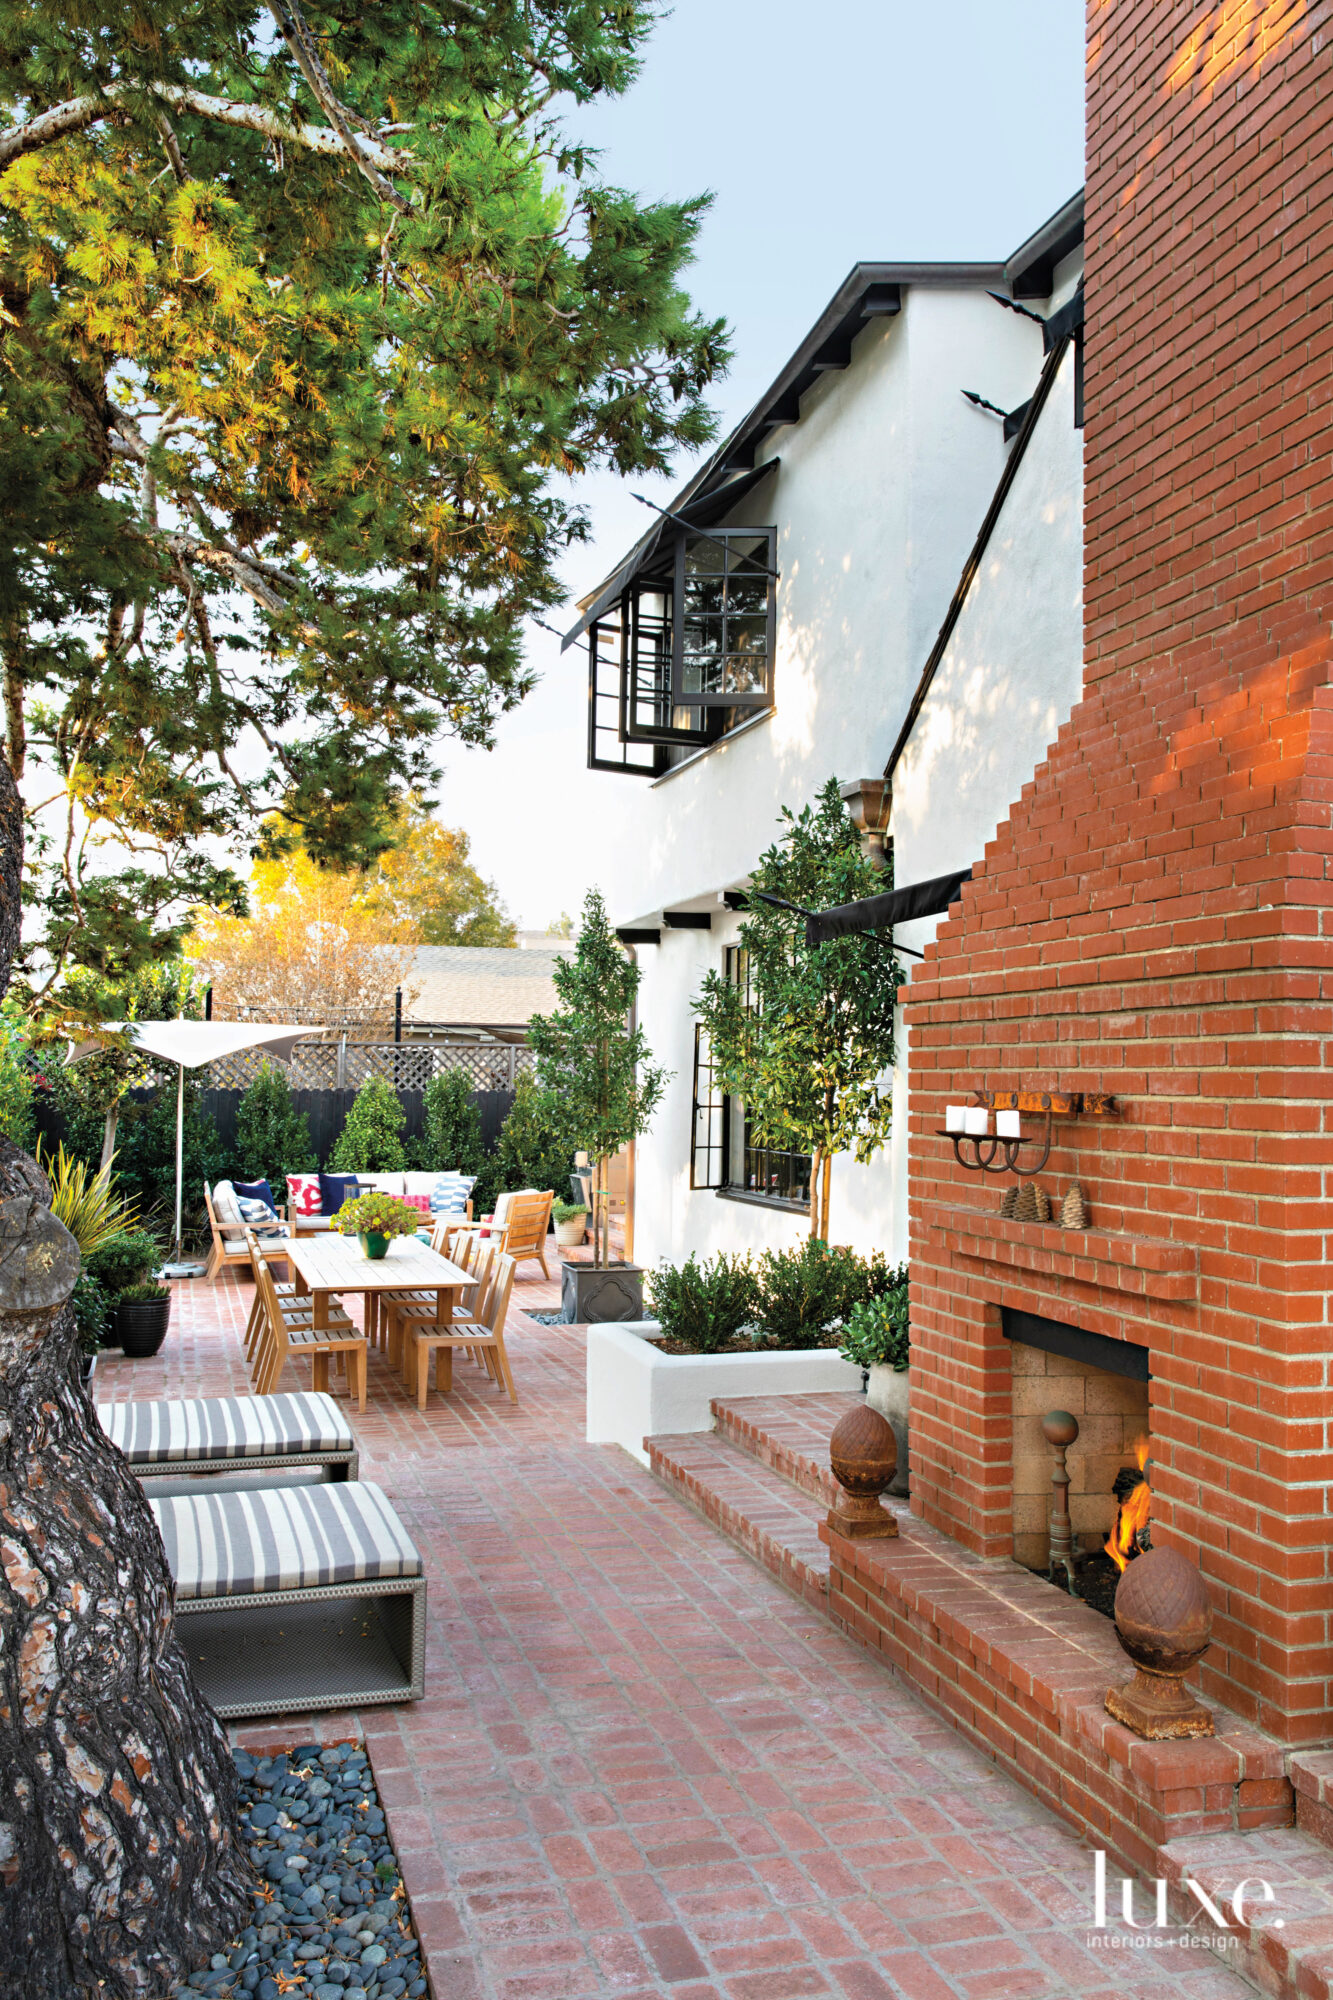 Terrace view with dining area and outdoor fireplace